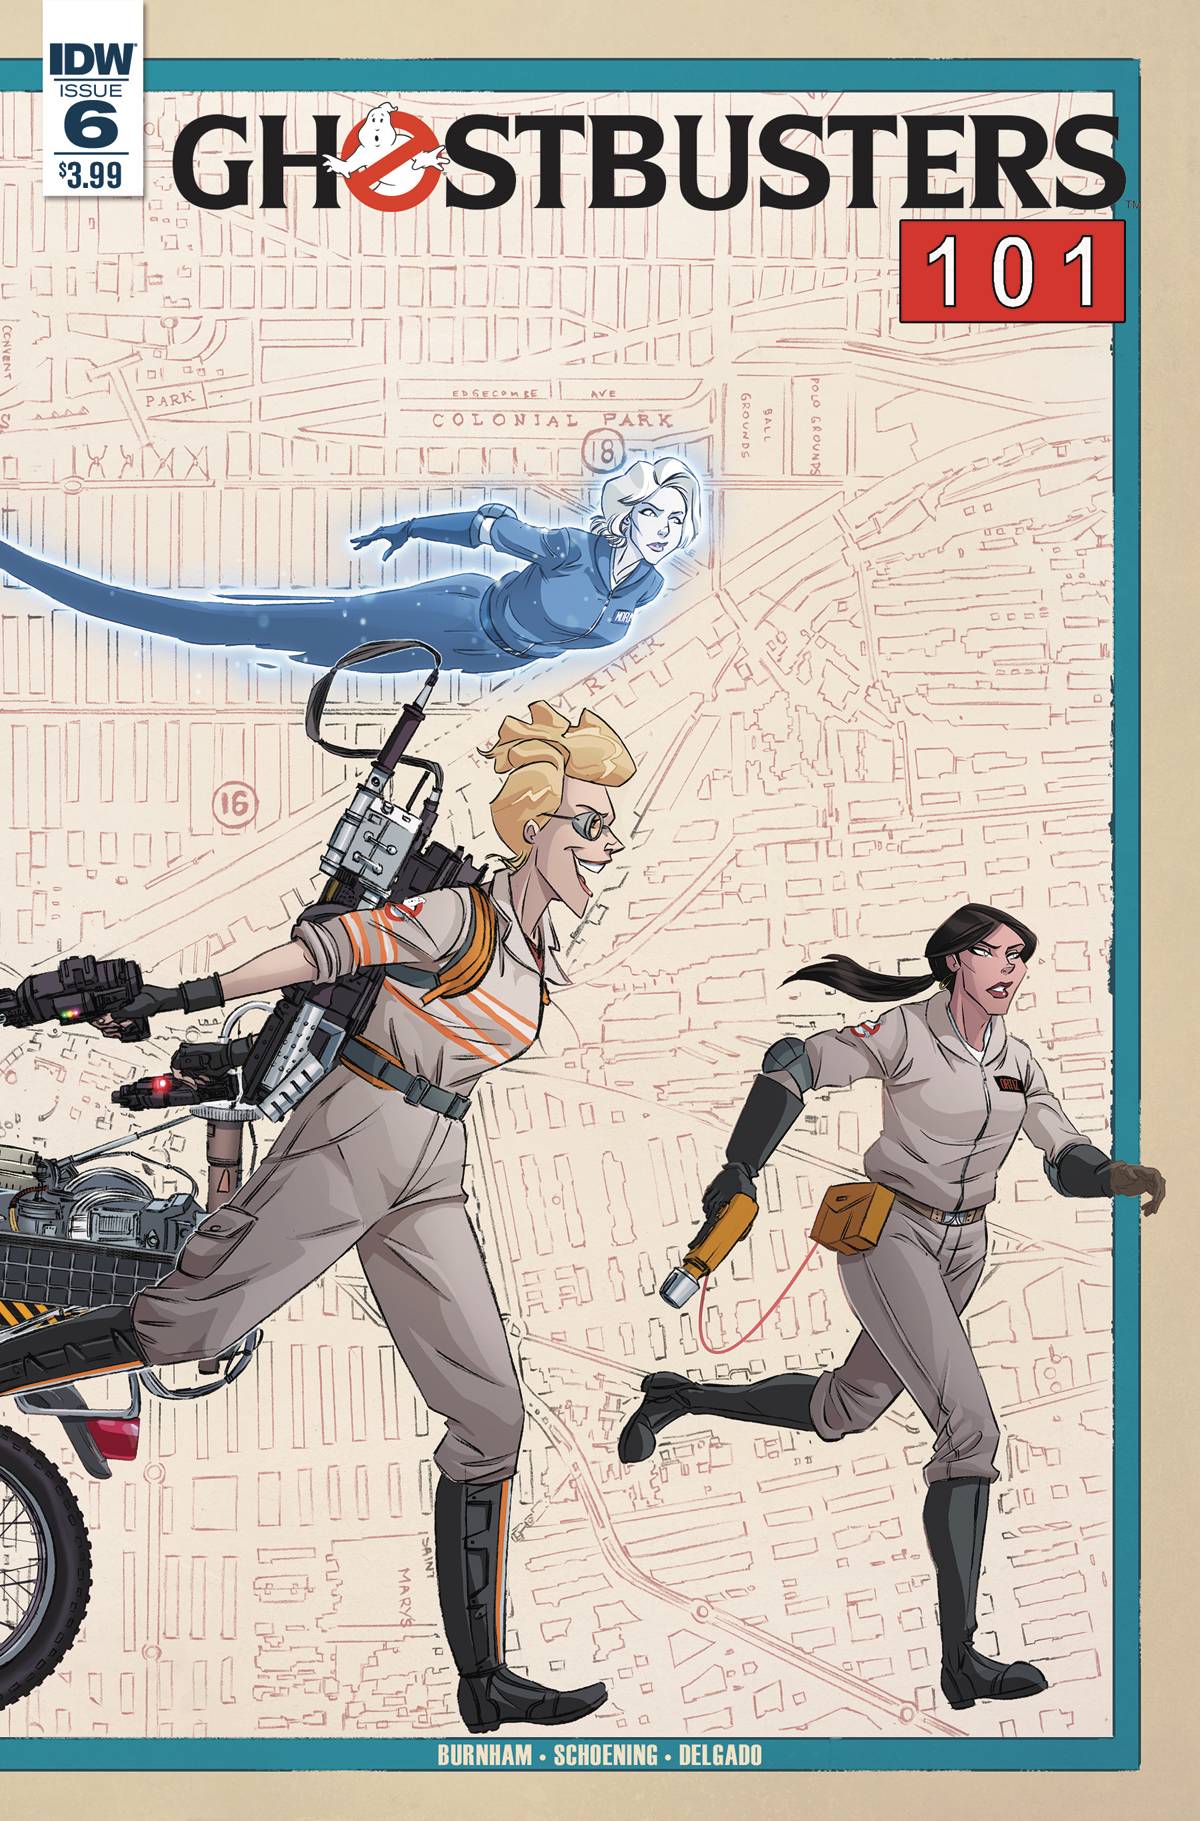 GHOSTBUSTERS 101#6